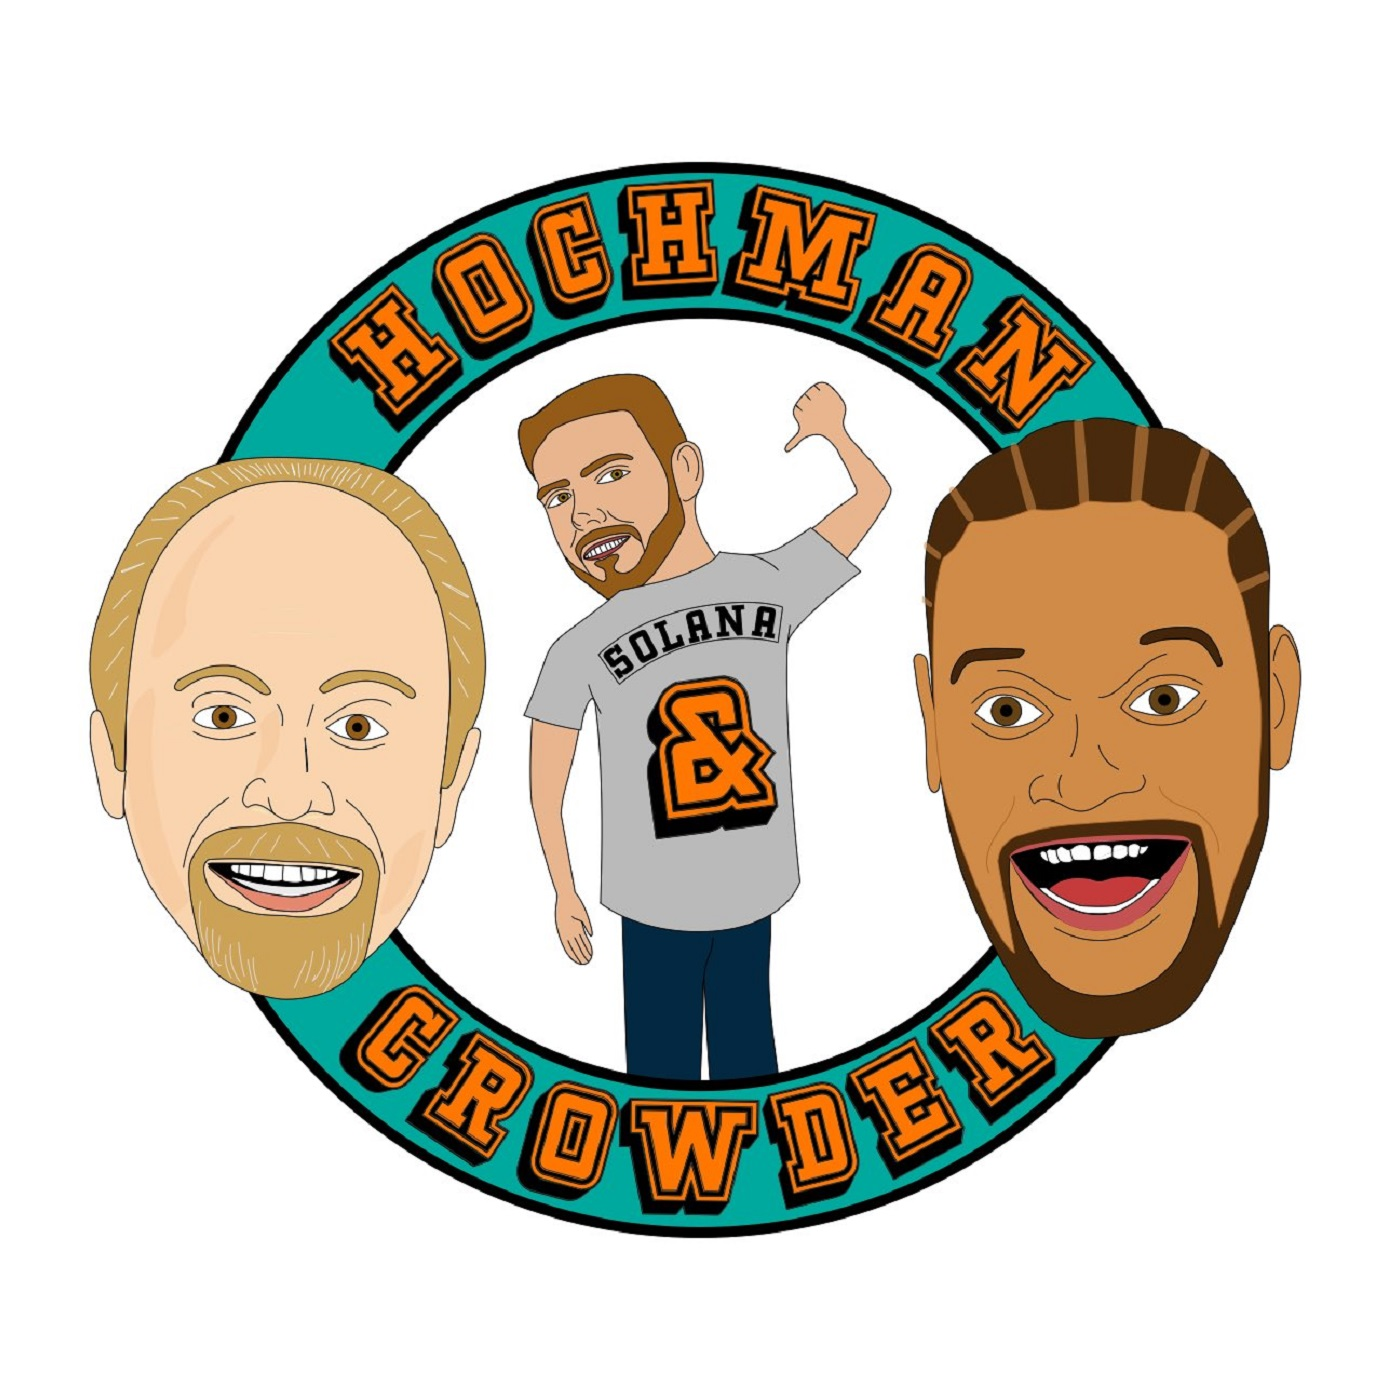 10-25-2019 - Hoch and Crowder Podcast Hour 3